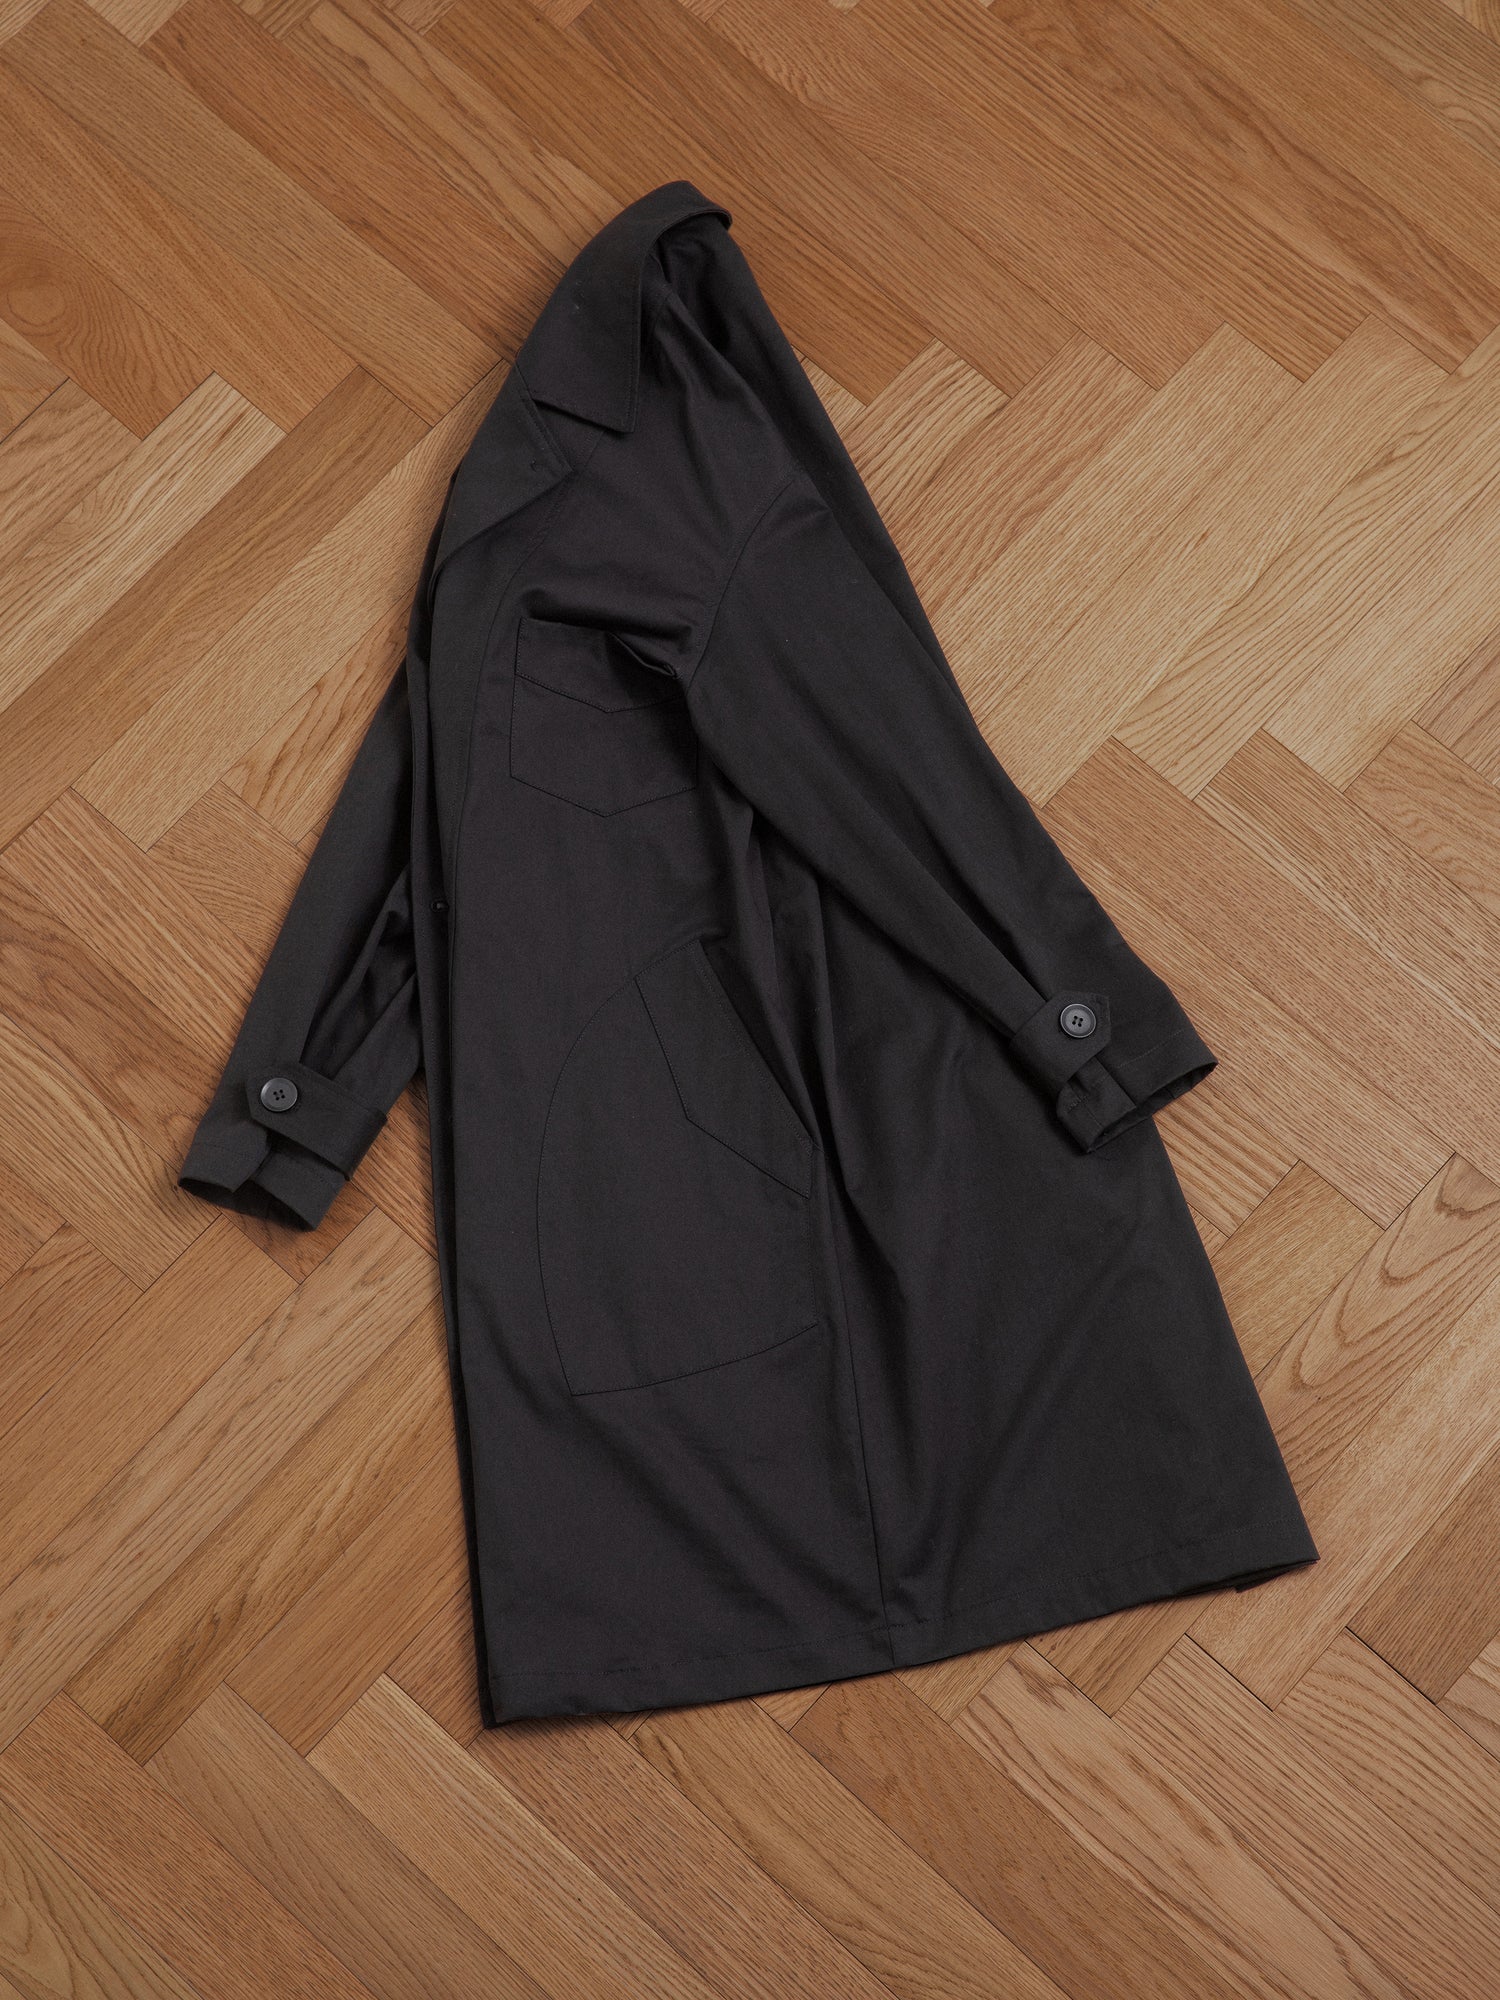 A black Found naval trench coat laying on a wooden floor, exuding enduring sophistication.